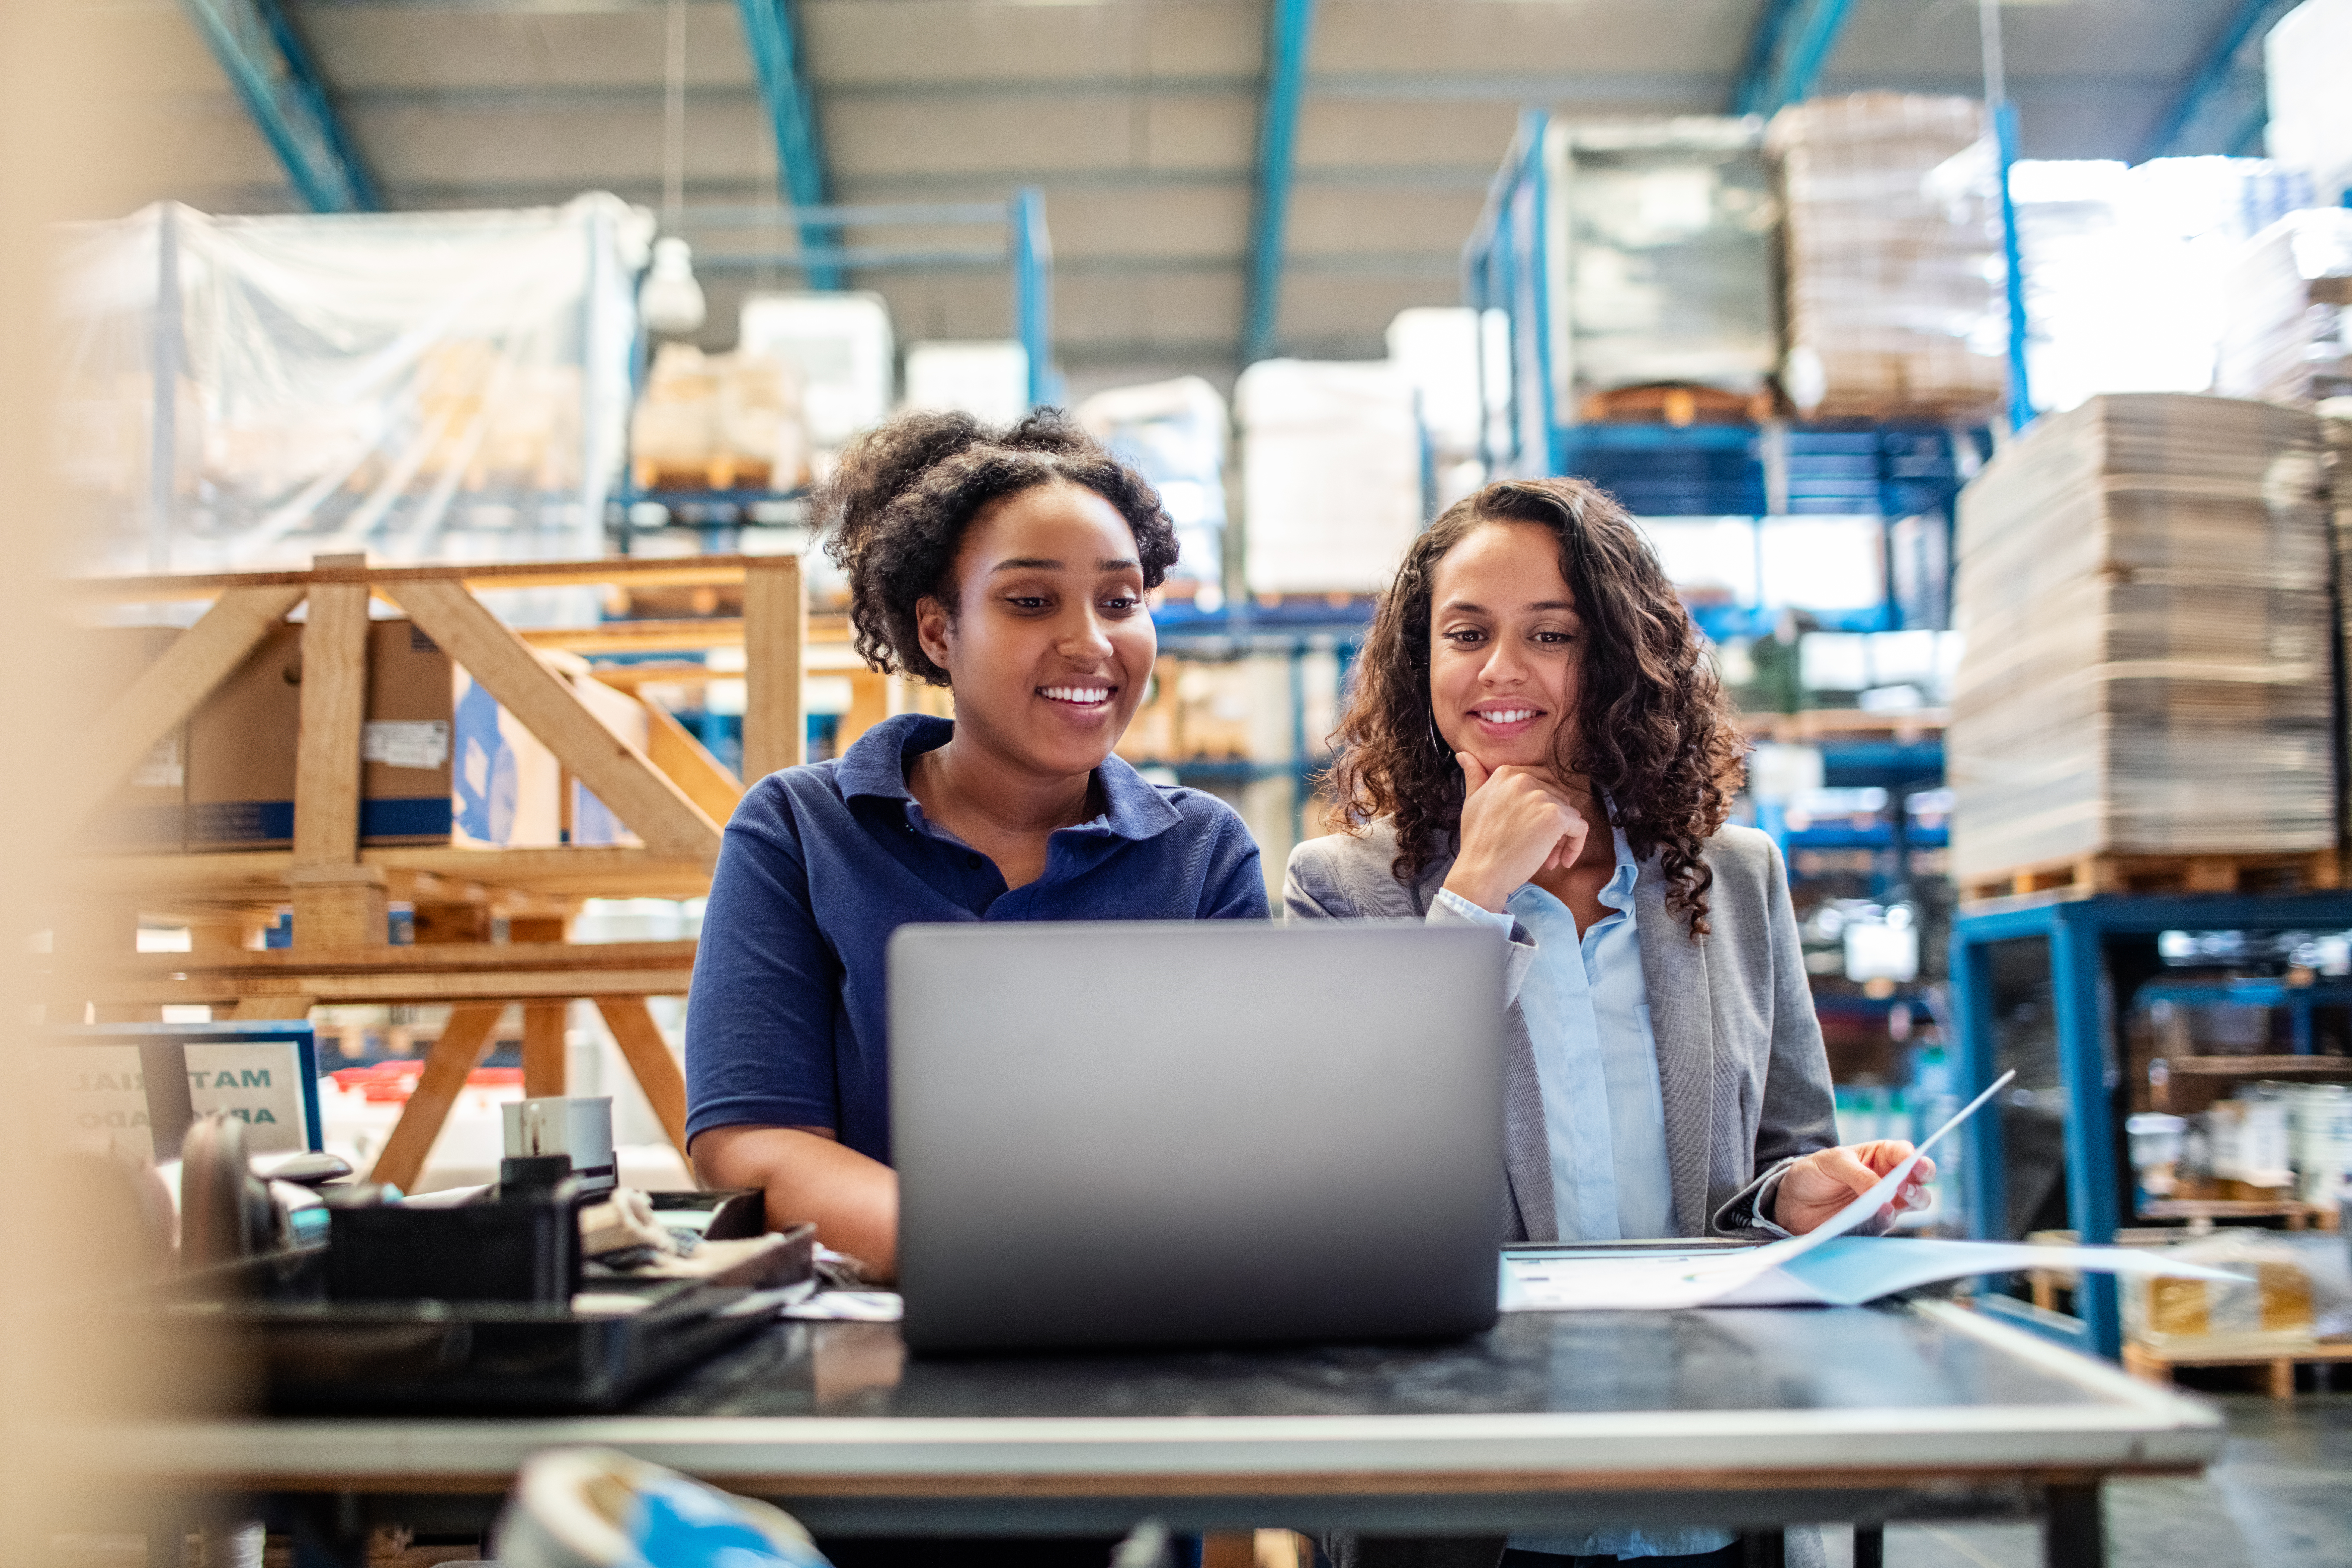 Two women look at a laptop screen in a warehouse.